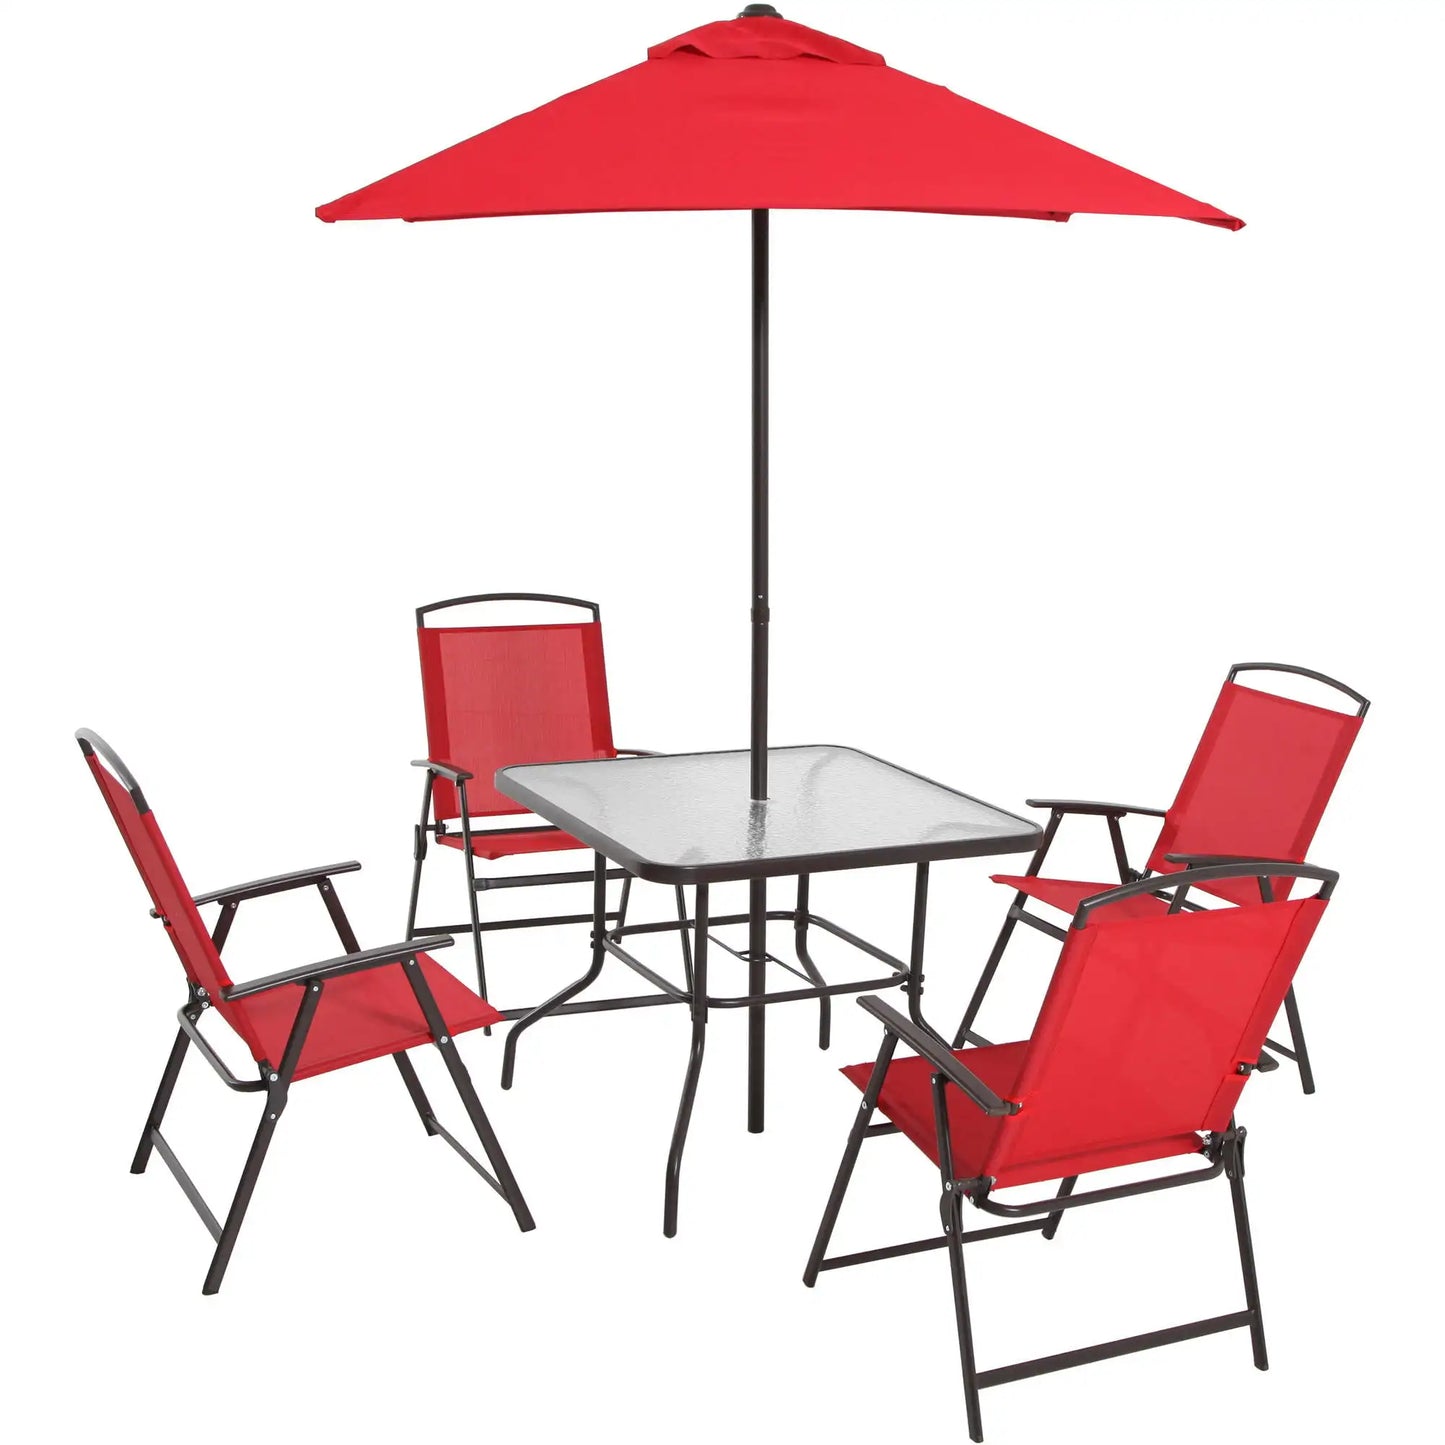 6 Piece Outdoor patio furniture with 4 chairs, and a table umbrella. - My Store